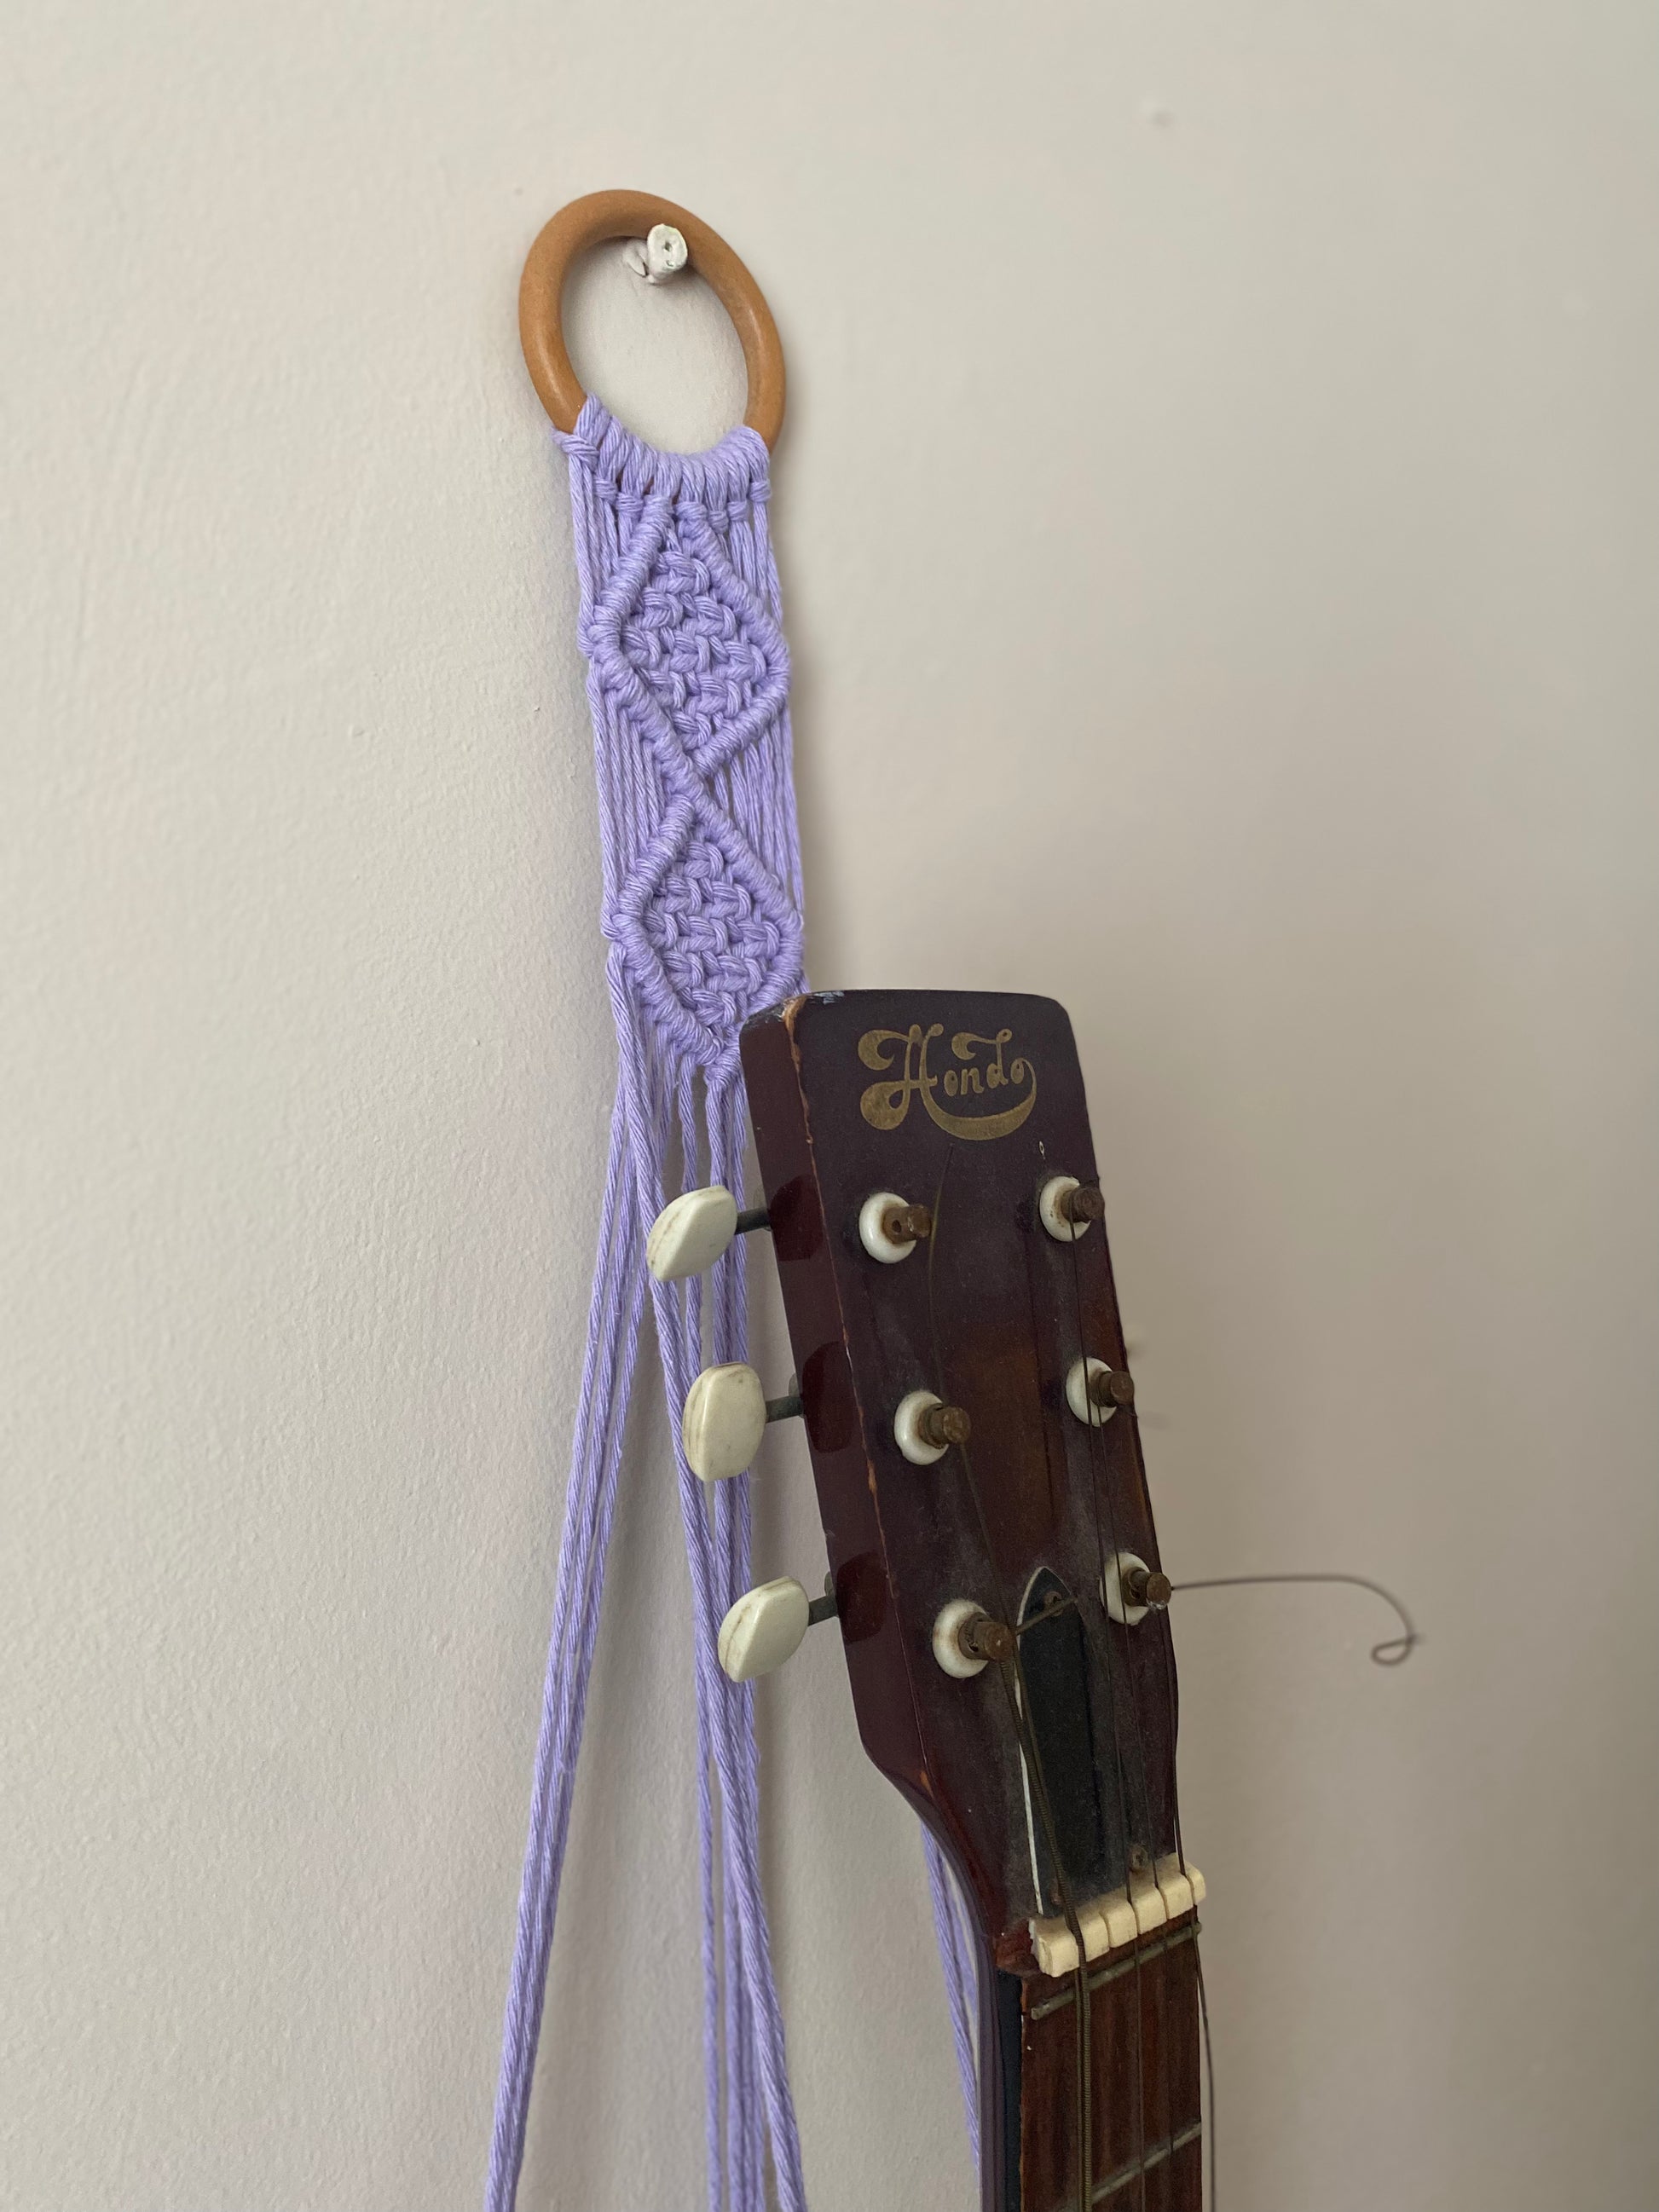 Wall hanging macrame 3/4 size guitar hanger – Macra-Made-With-Love